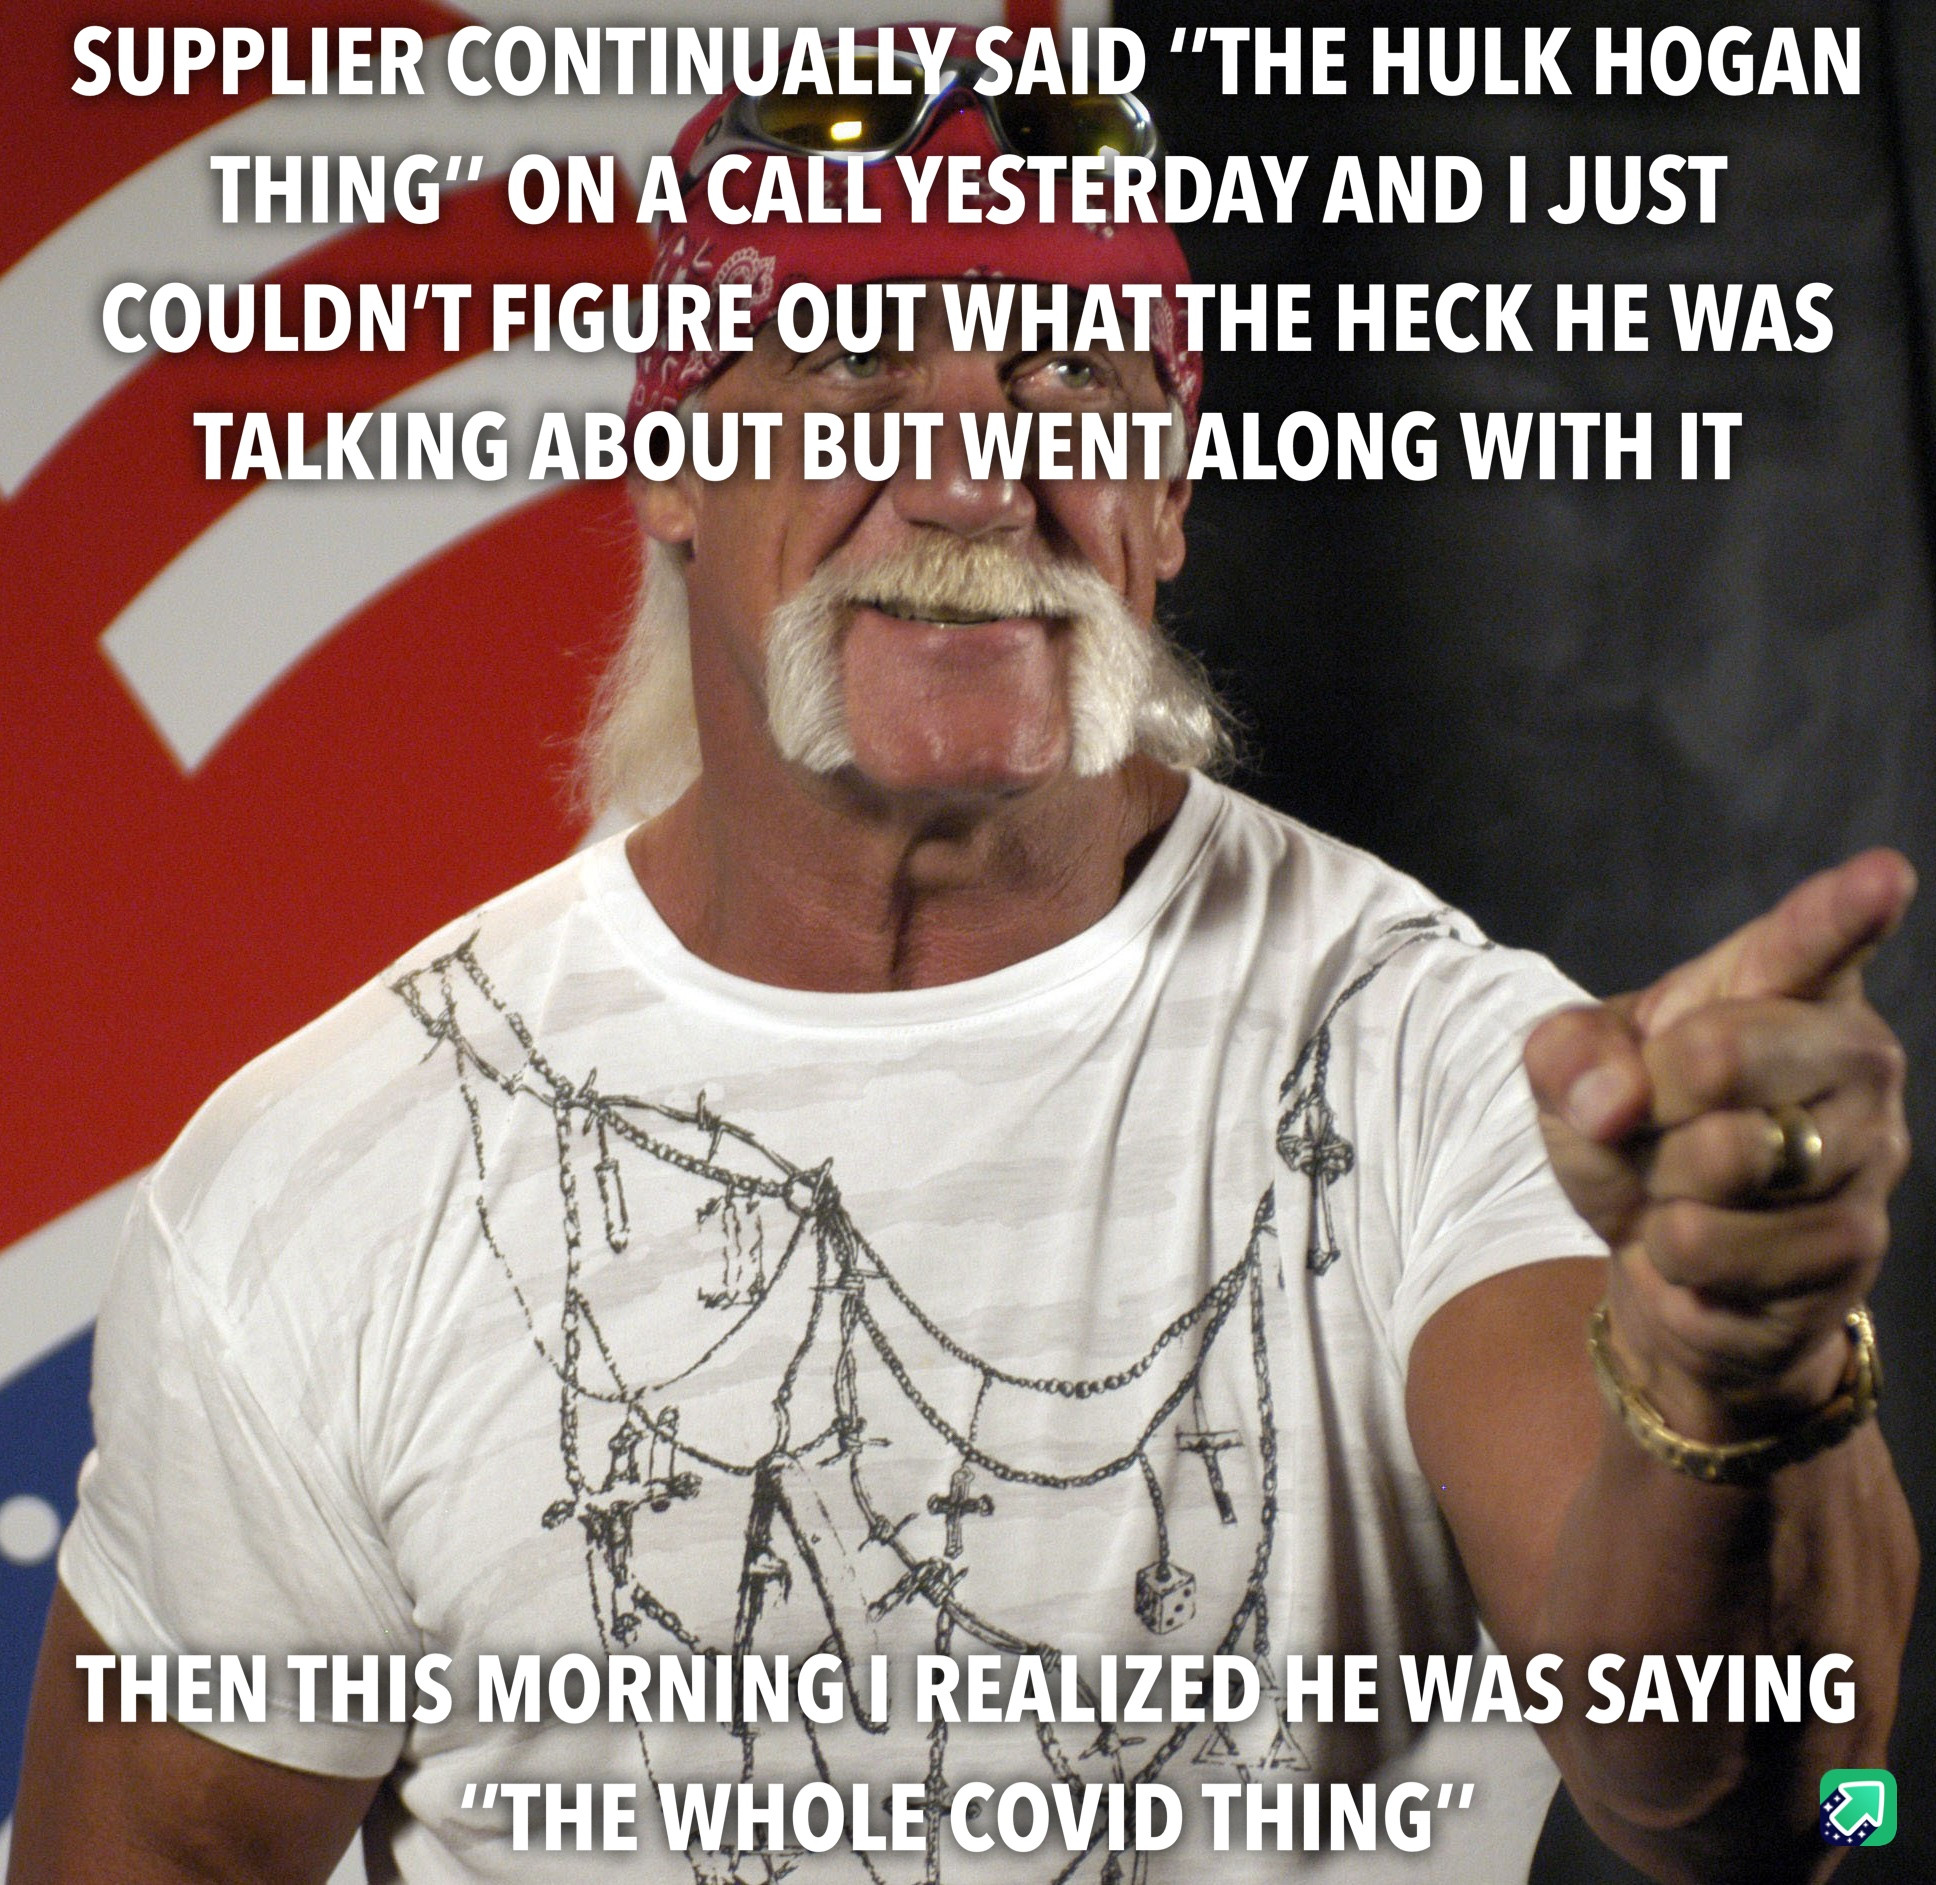 bring your own lunch meme - Supplier Continually Said "The Hulk Hogan Thing" On A Call Yesterday And I Just Couldn'T Figure Out What The Heck He Was Talking About But Went Along With It Then This Morning I Realized He Was Saying "The Whole Covid Thing"